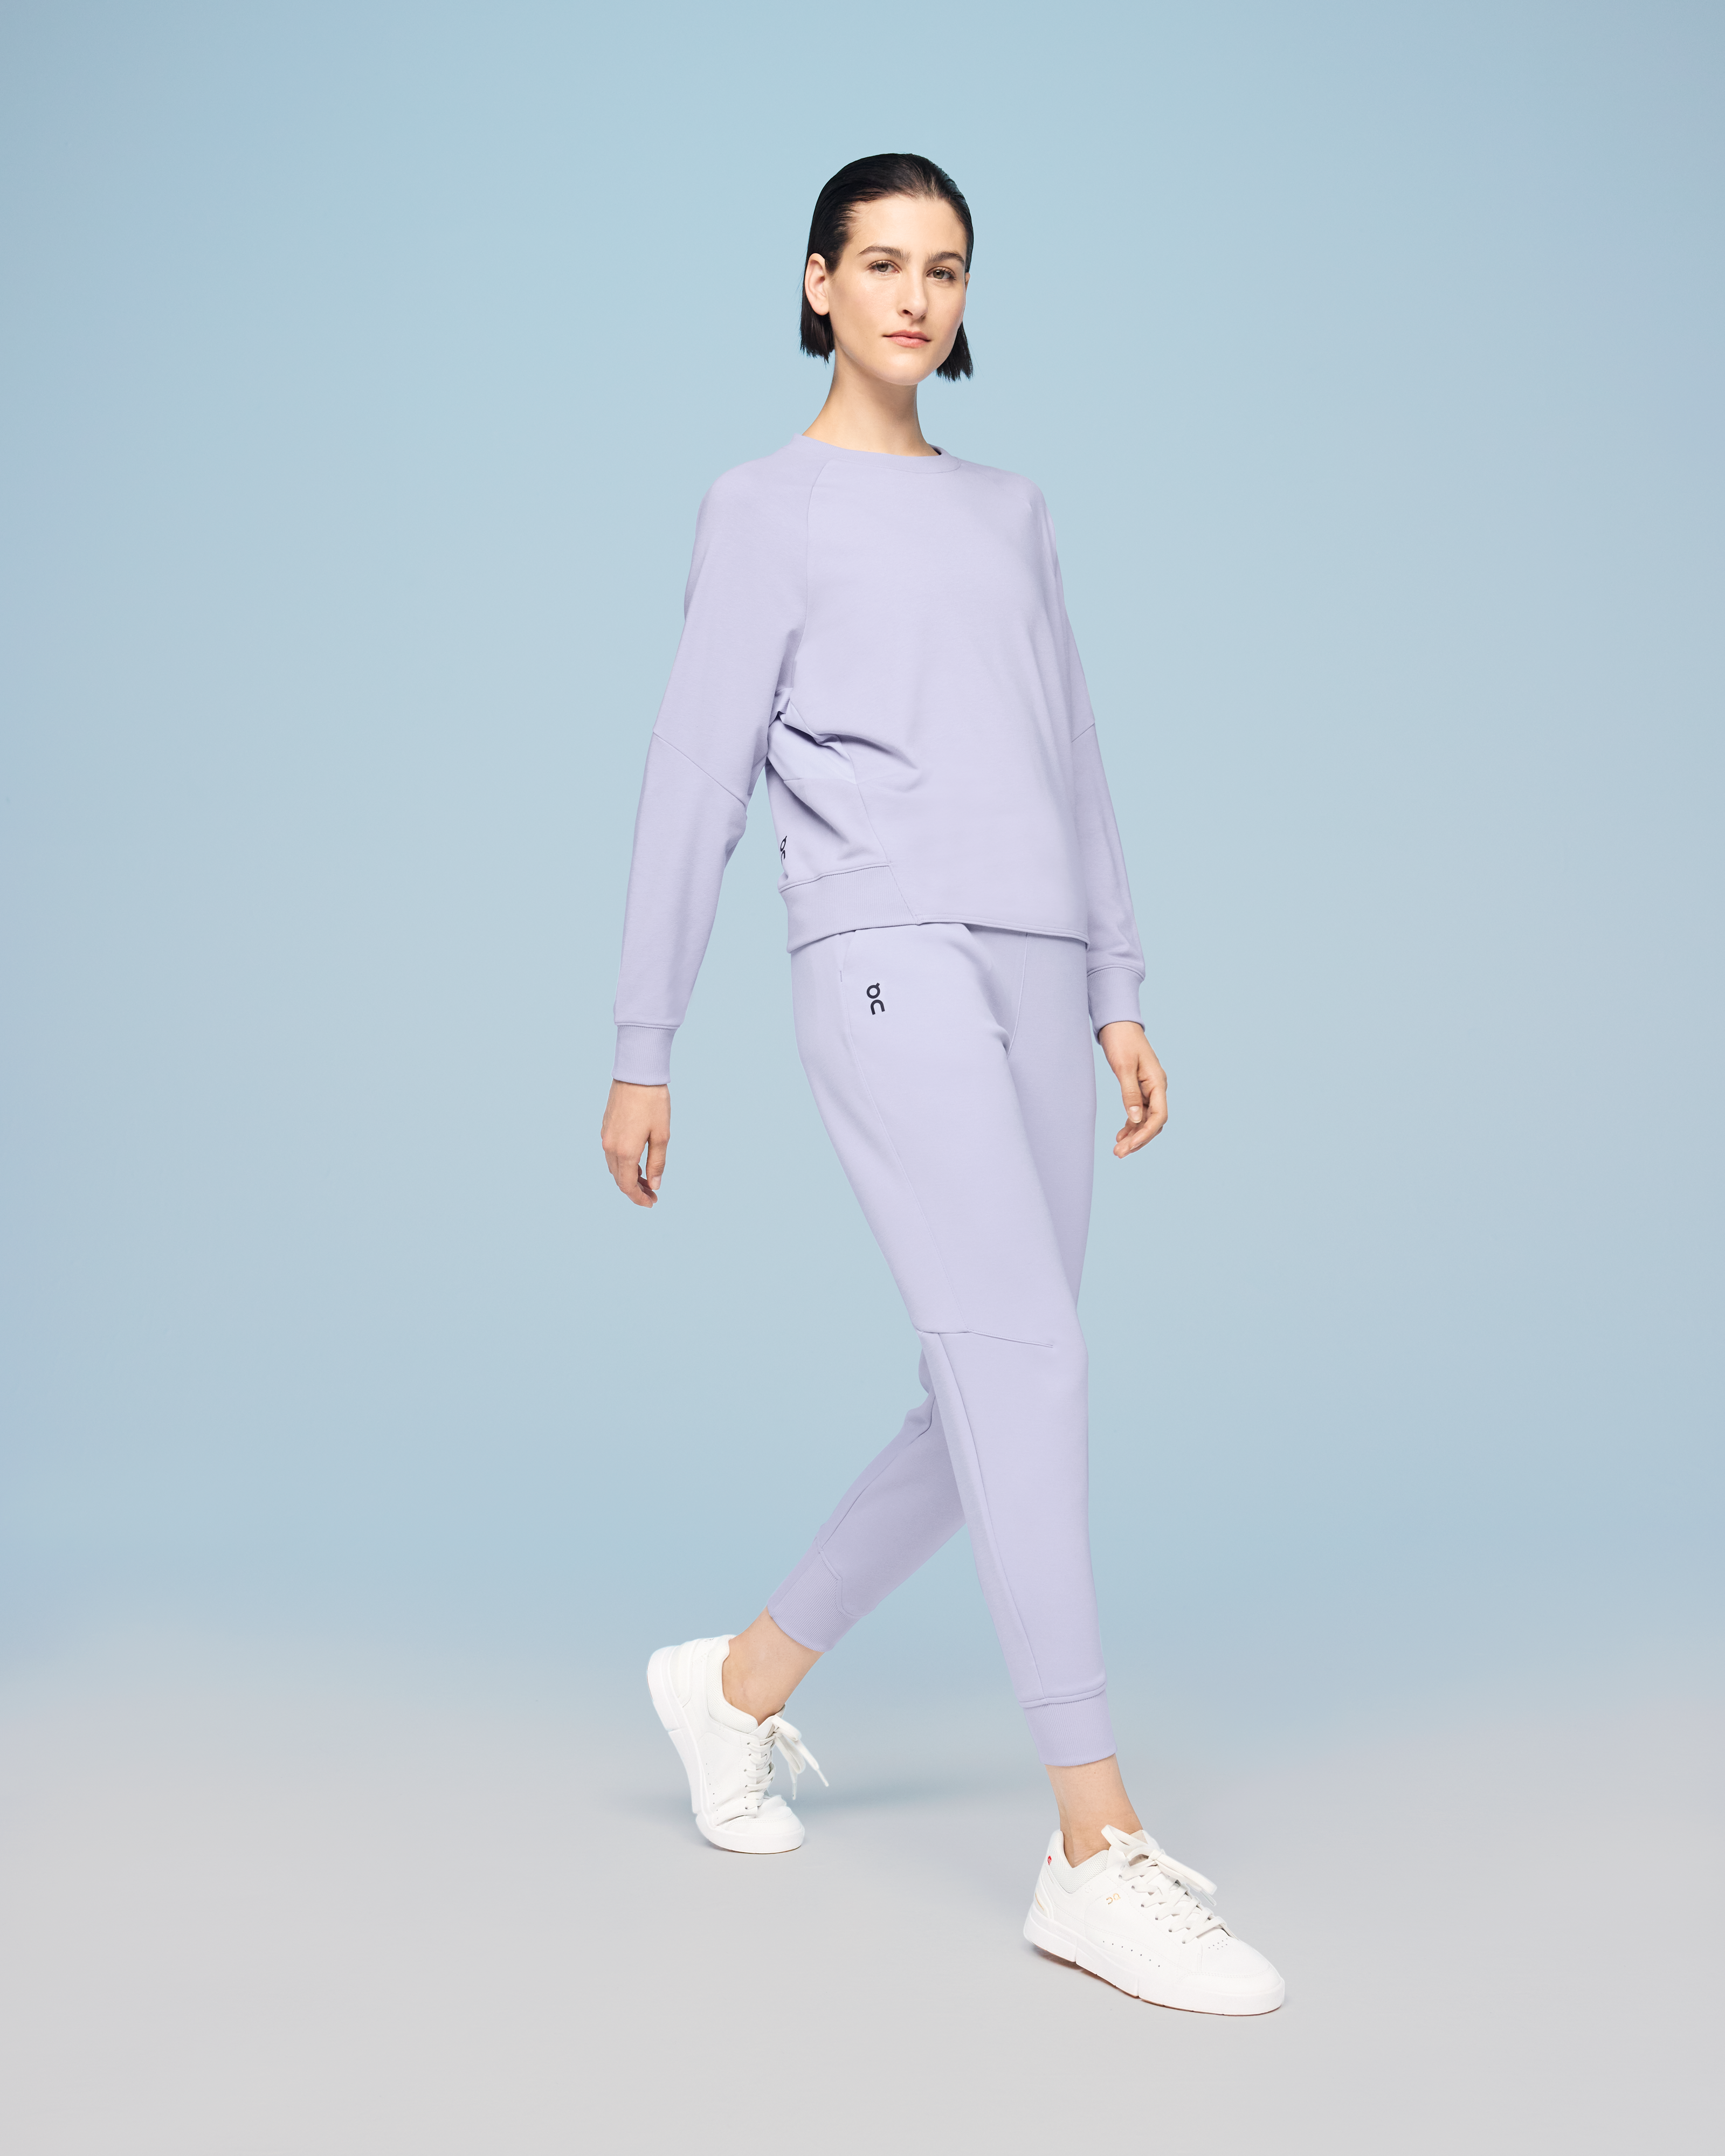 Buy Lavender Track Pants for Women by Outryt Sport Online